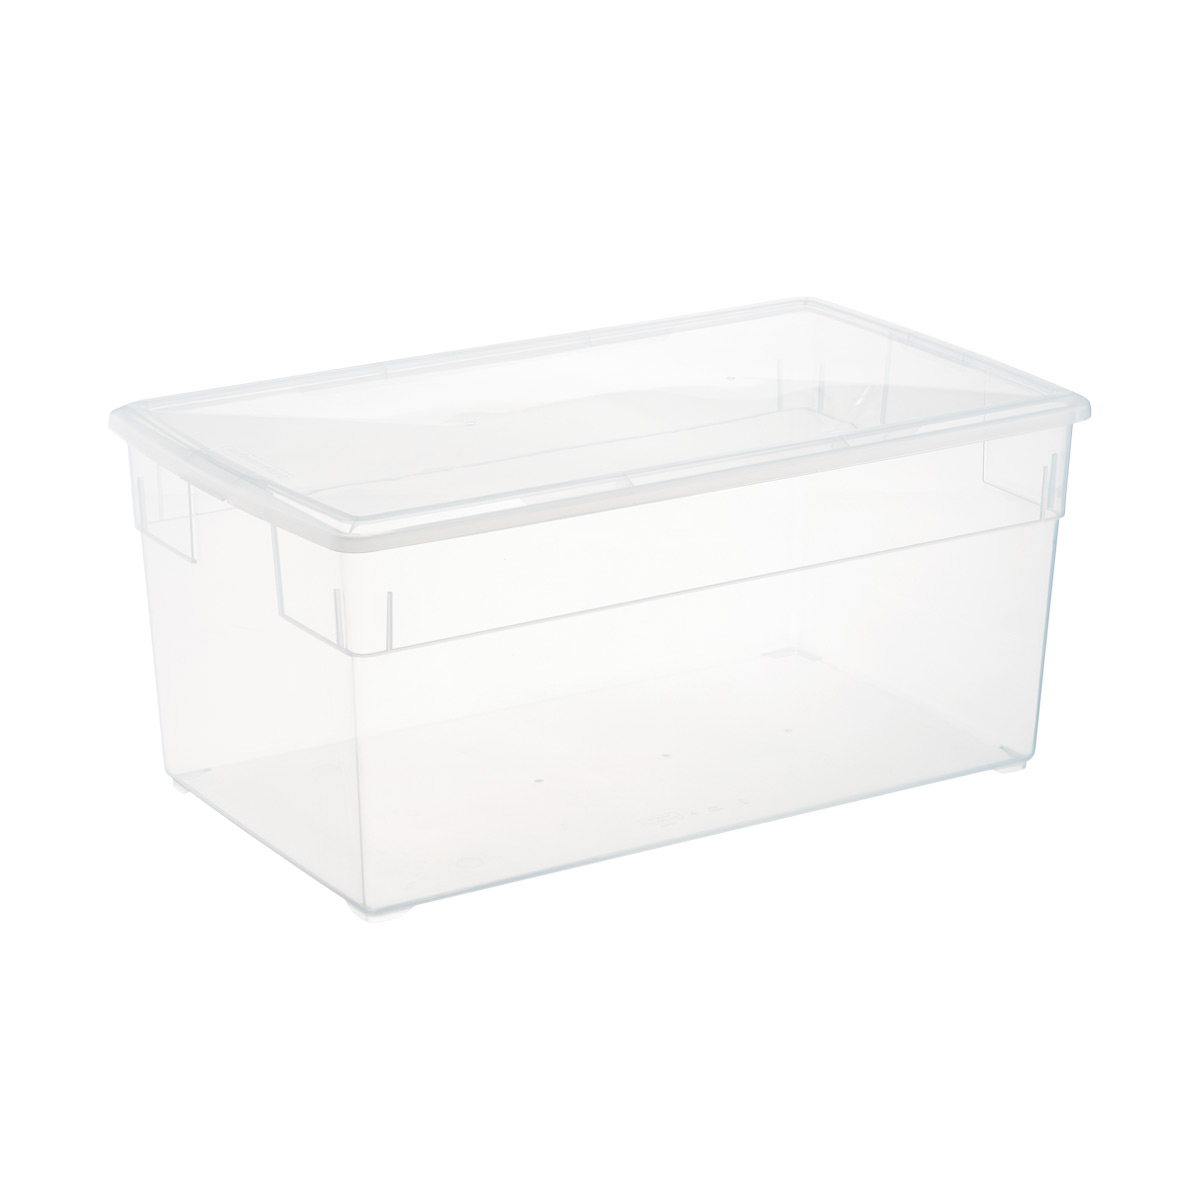 USEFUL FOR EVERYTHING TOYS ! 2 x 133 LITRE EXTRA LARGE PLASTIC STORAGE BOXES 